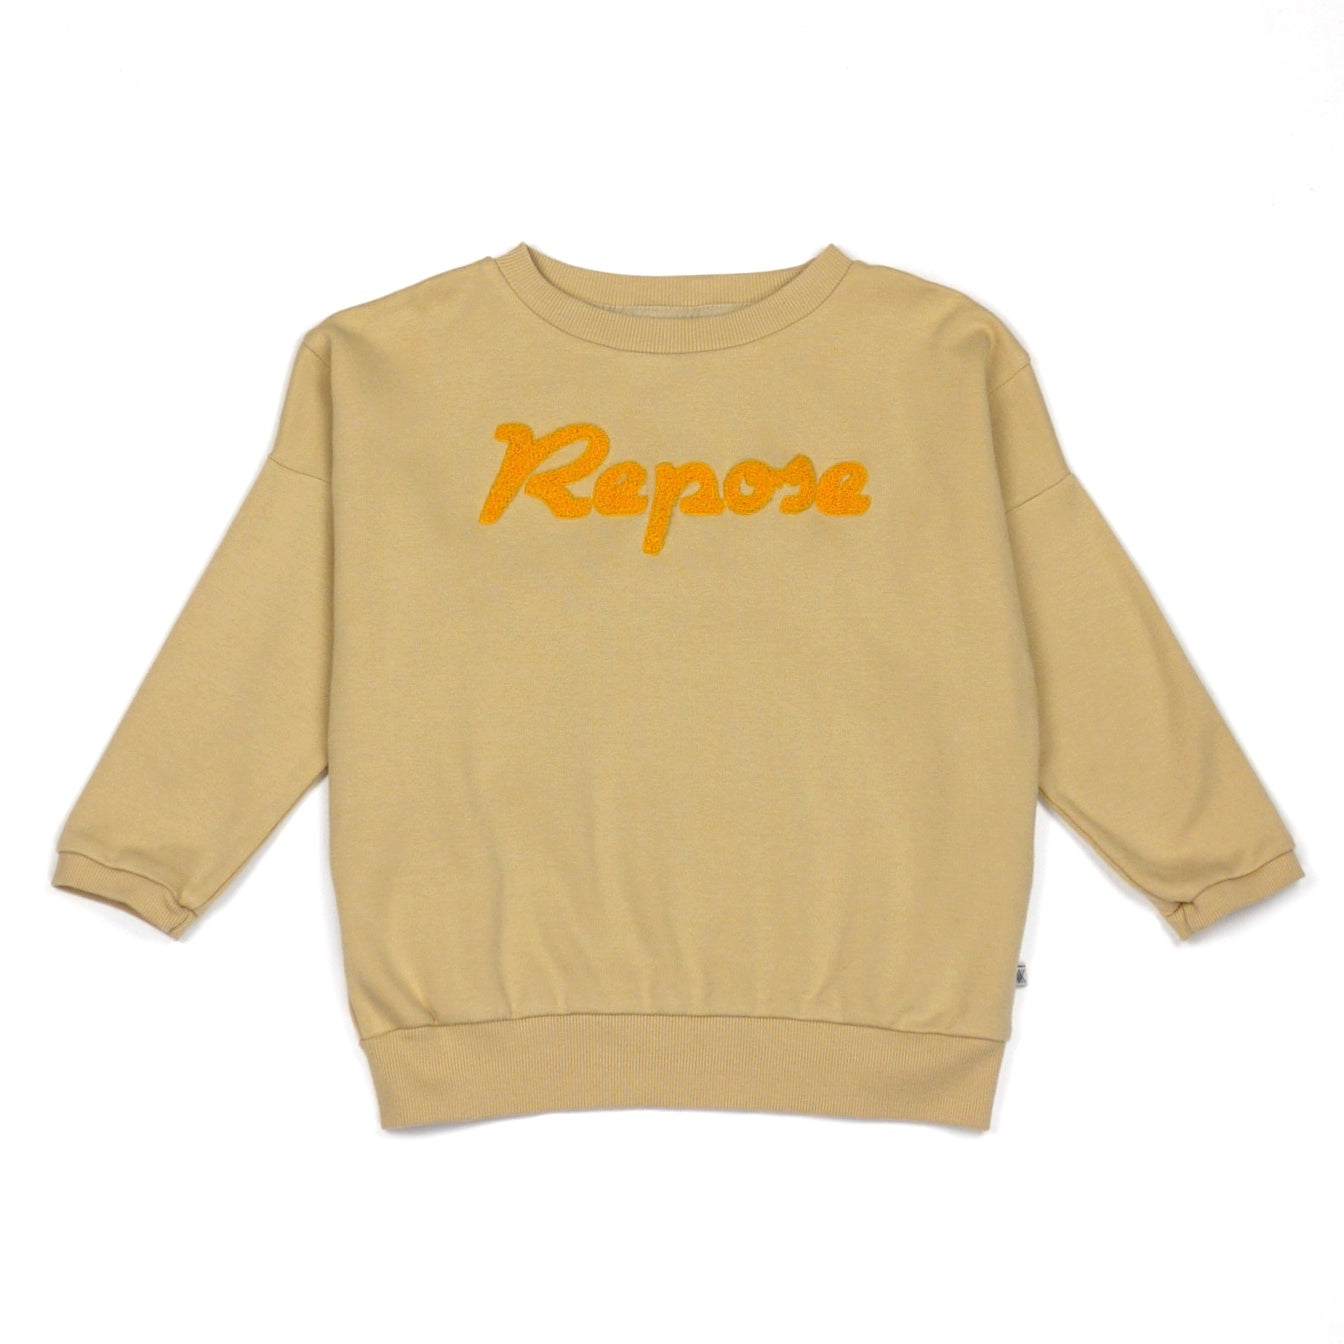 Repose AMS oversized sweater size 4 years